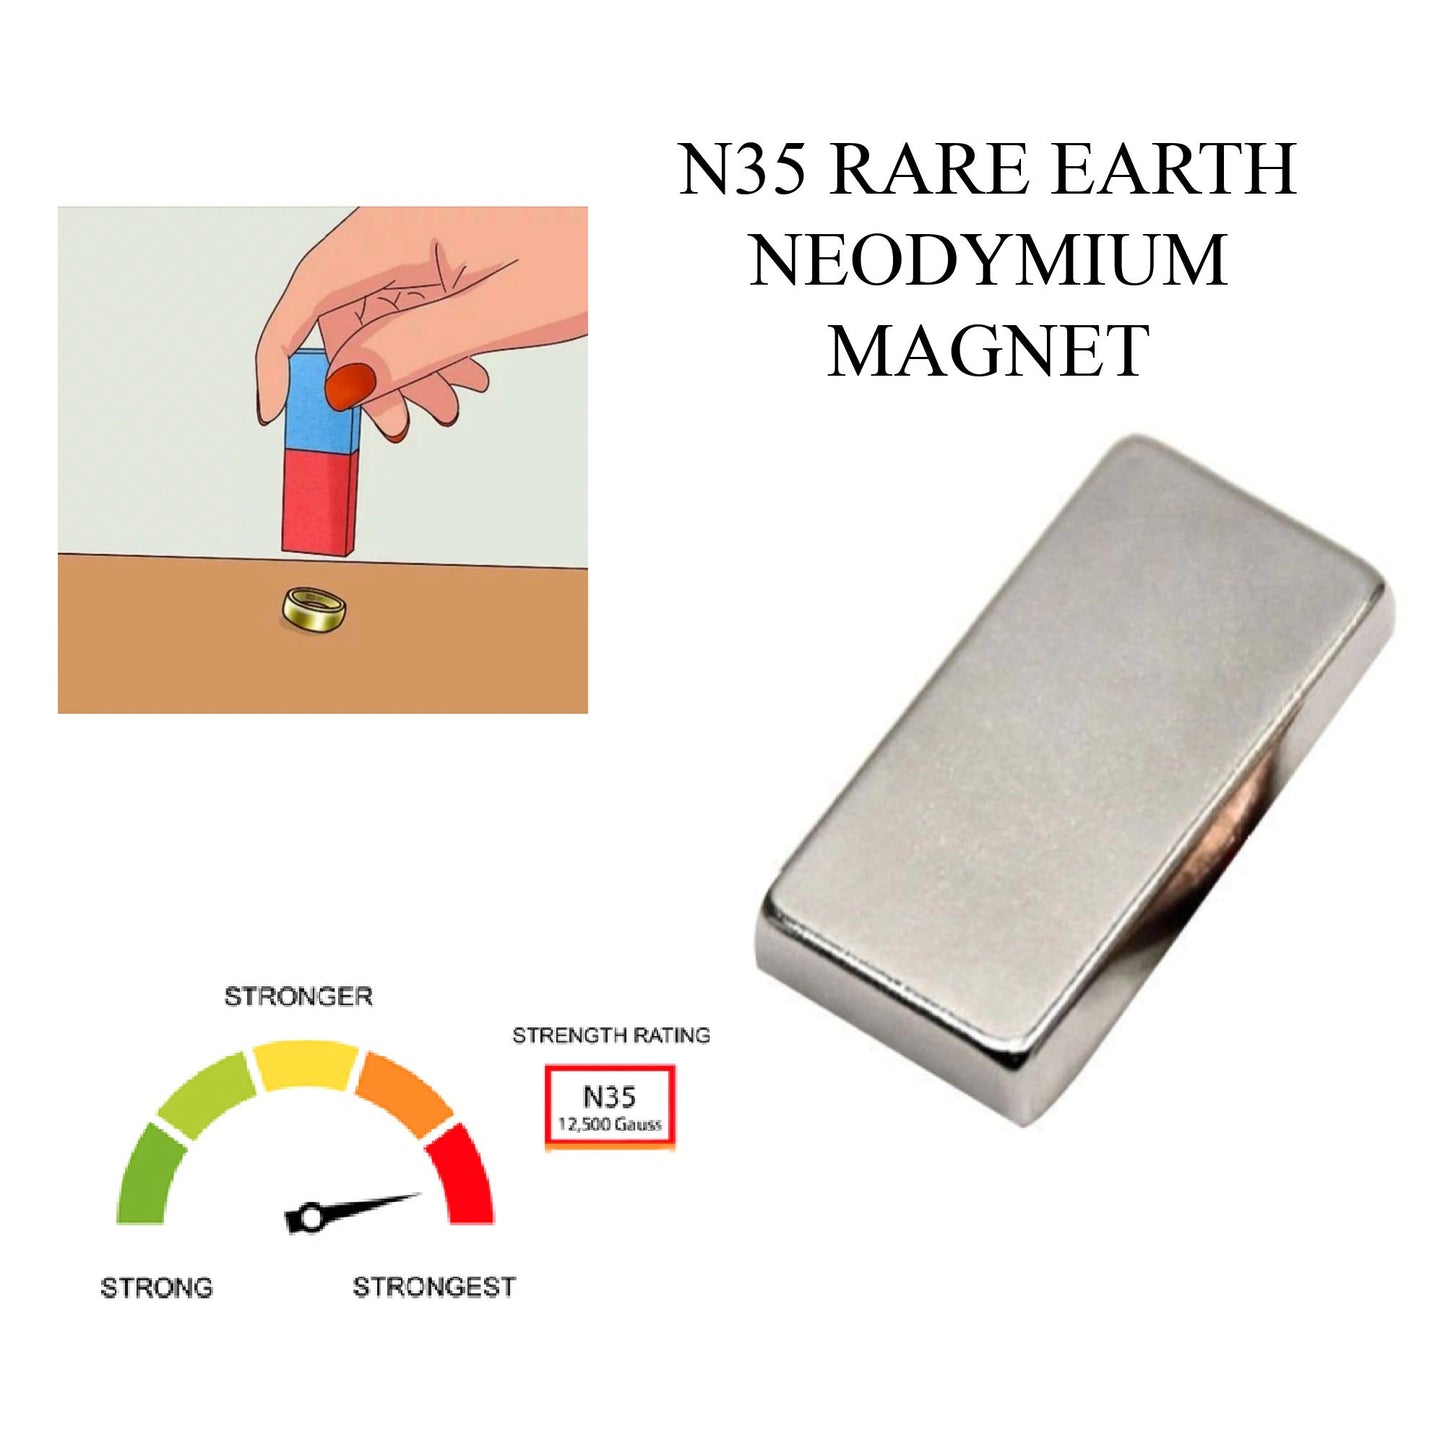 How to Make a Rare Earth Magnet Jewelry Easily : 3 Steps (with